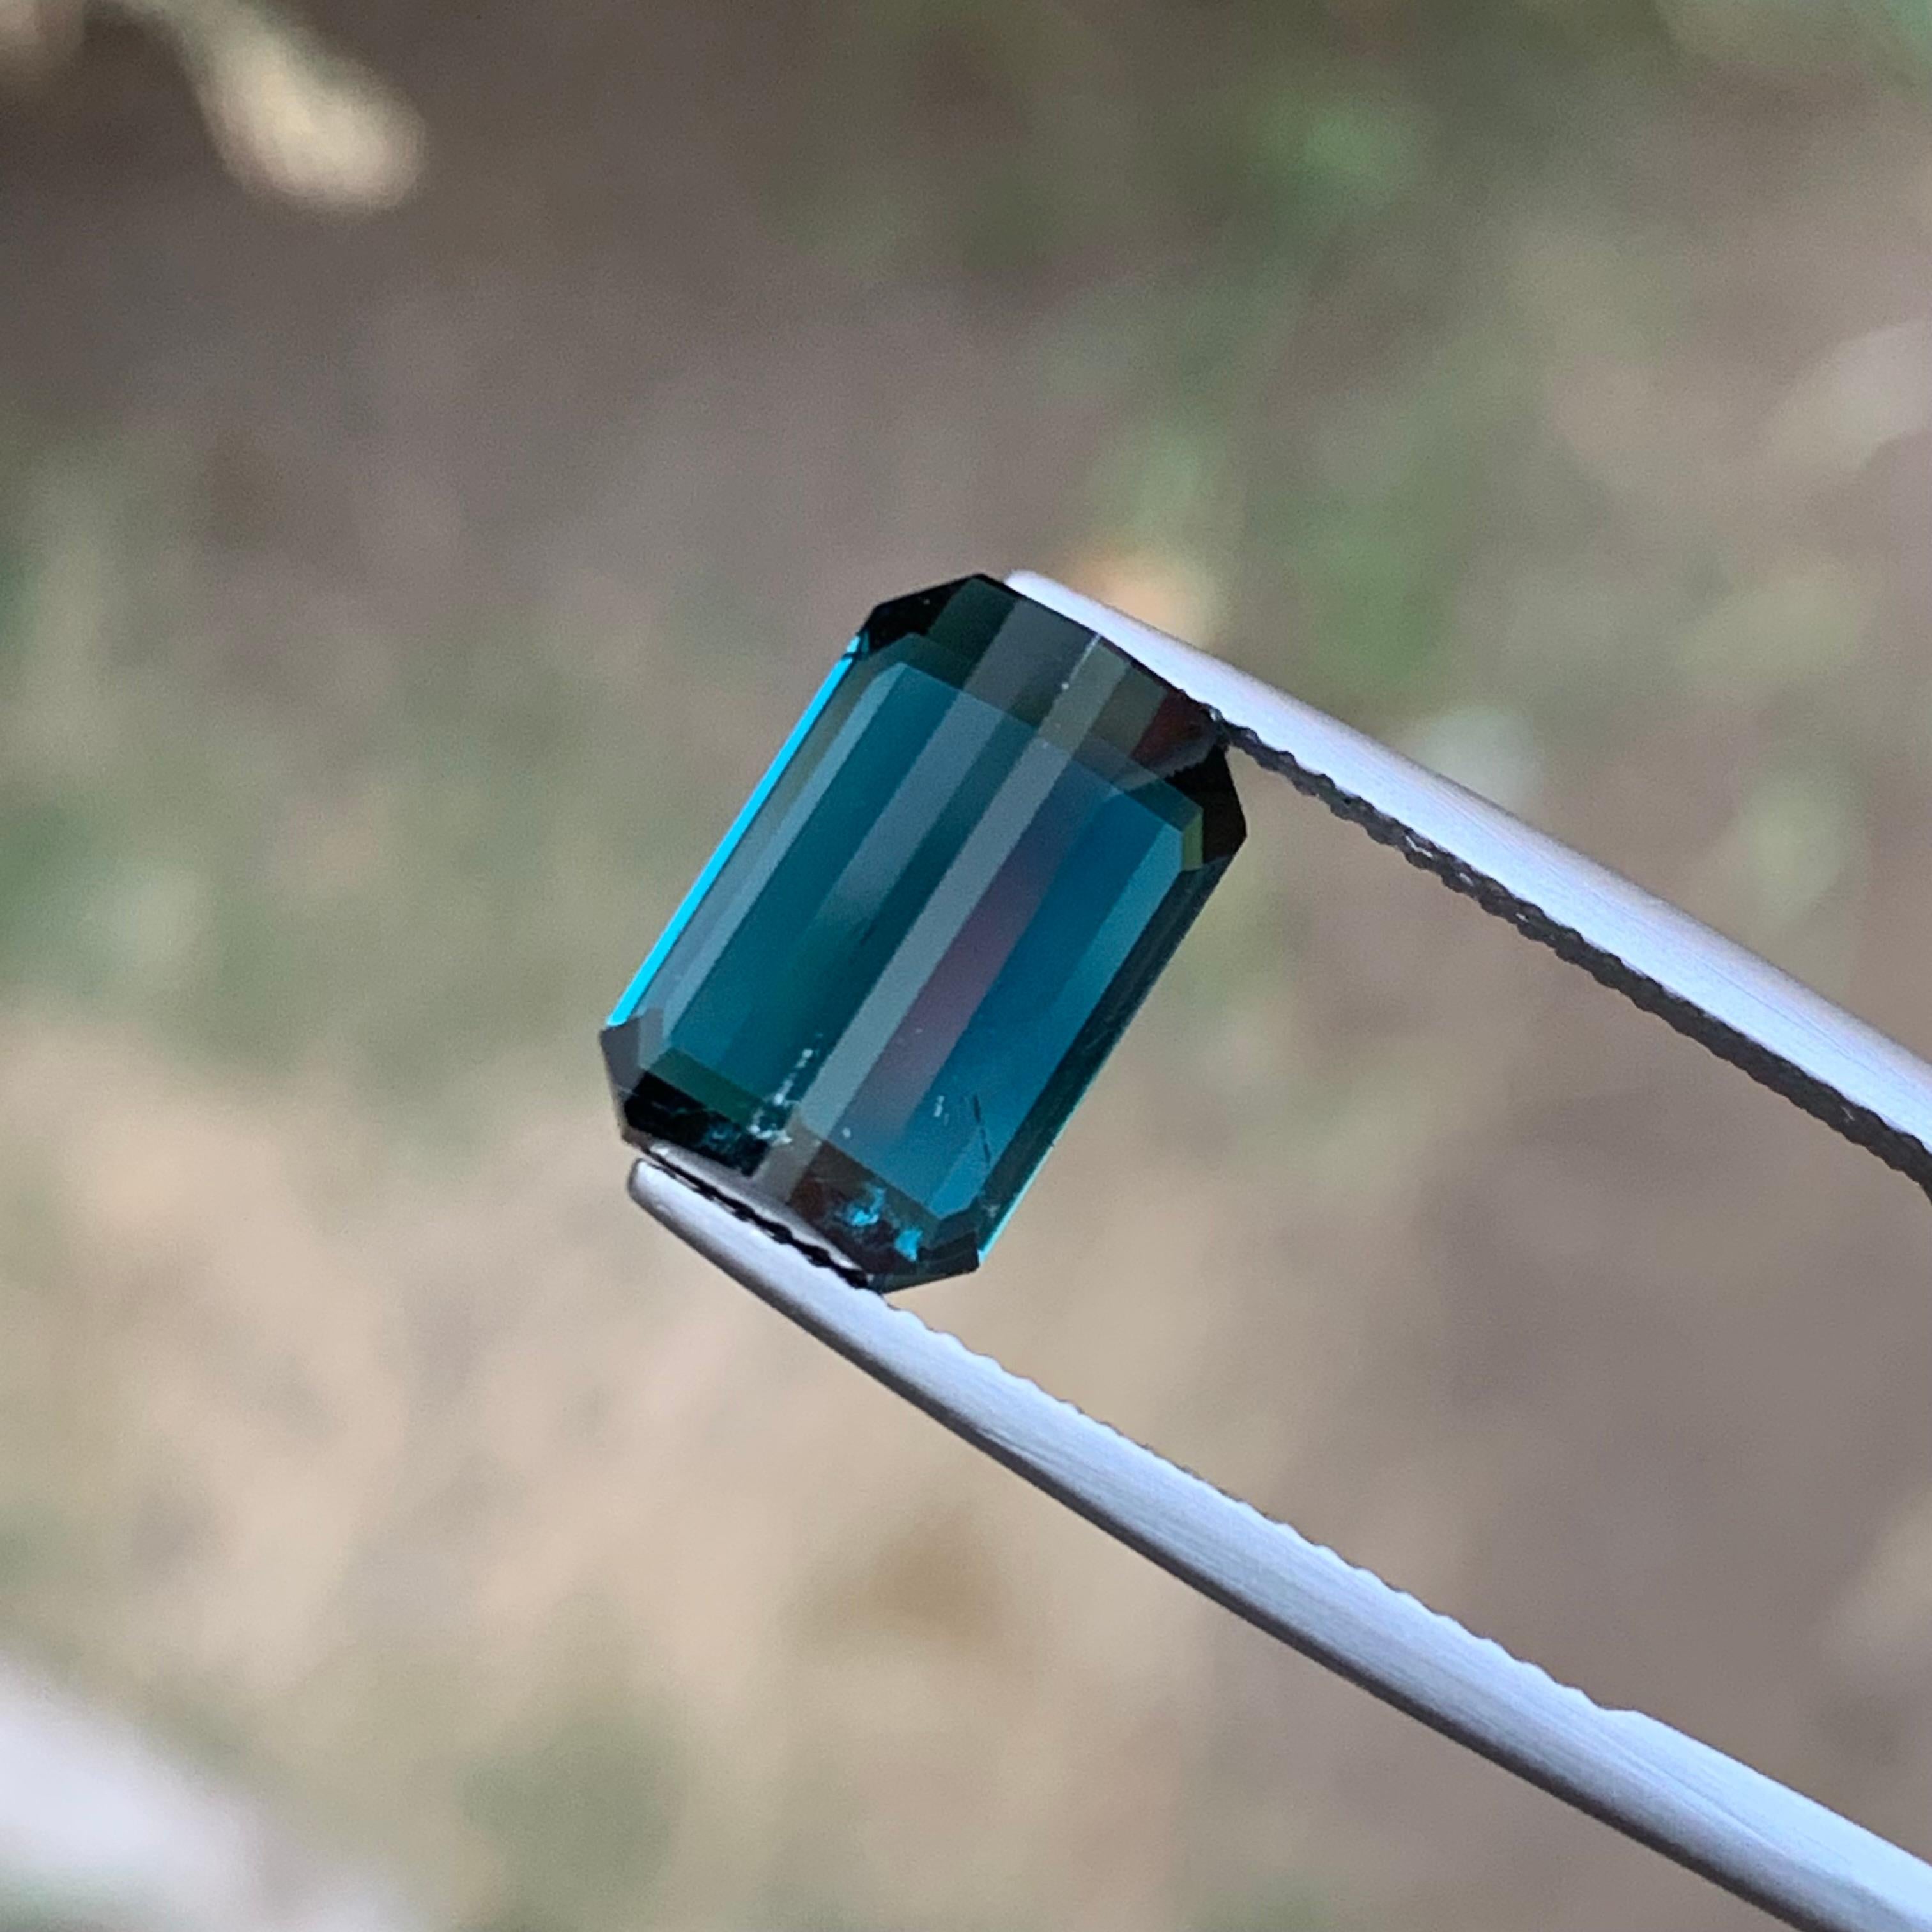 Rare Deep Inky Blue Natural Tourmaline Gemstone, 6.15 Ct Emerald Cut for Ring Af 5